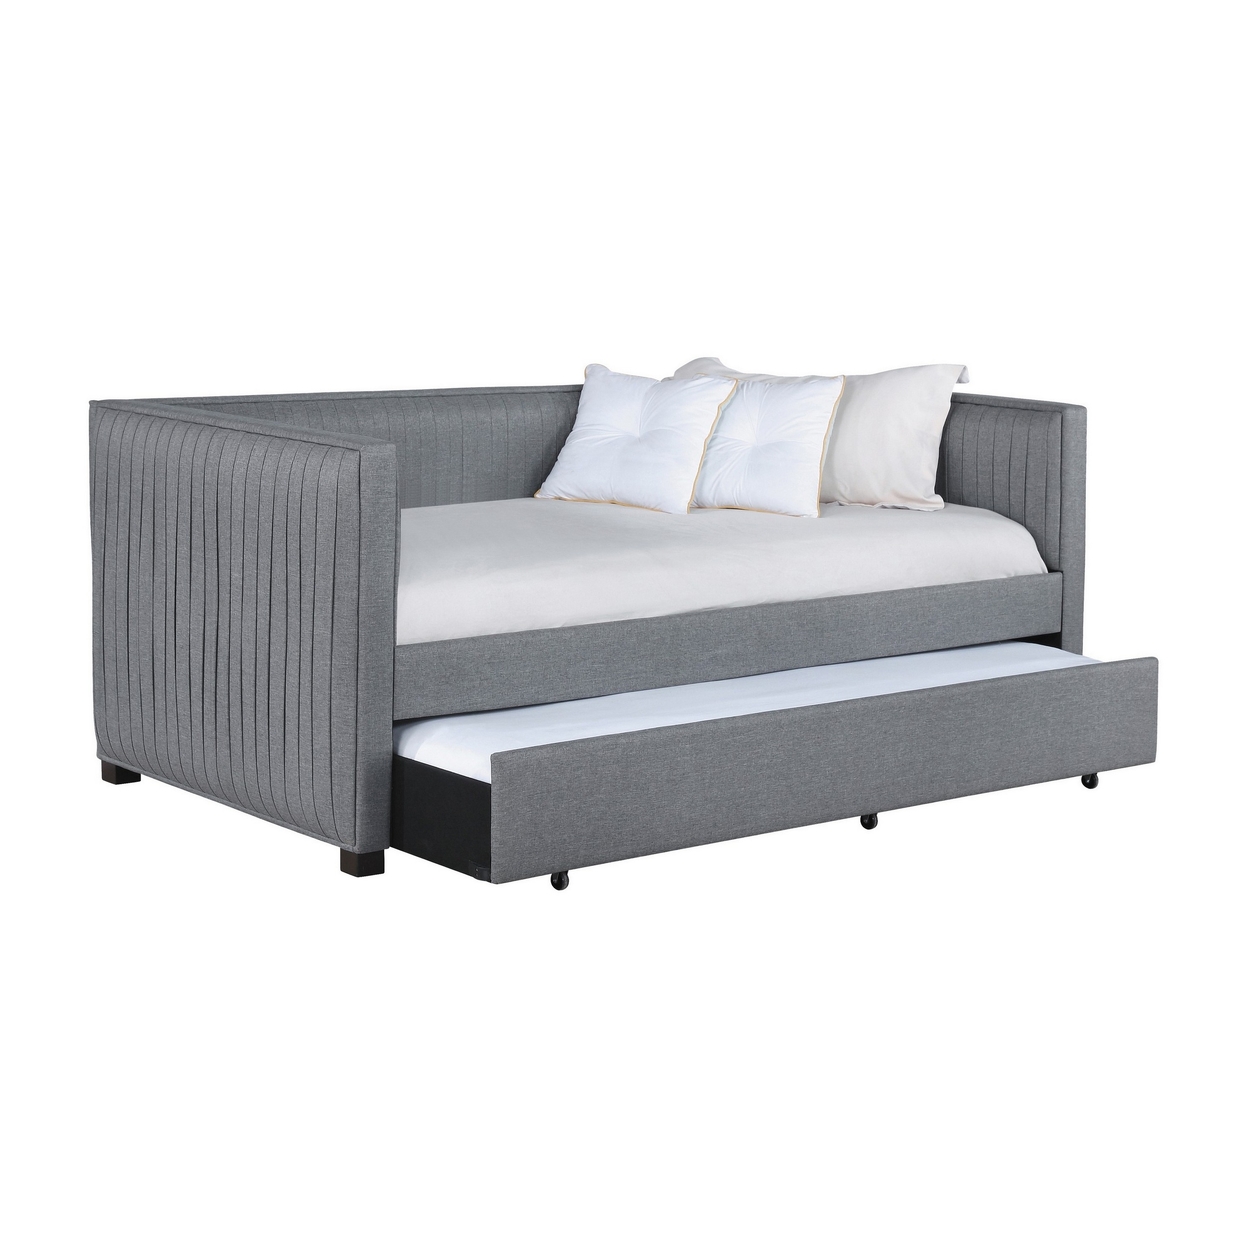 Modern Twin Daybed With Trundle, Shelter Back, Ribbed Gray Upholstery- Saltoro Sherpi